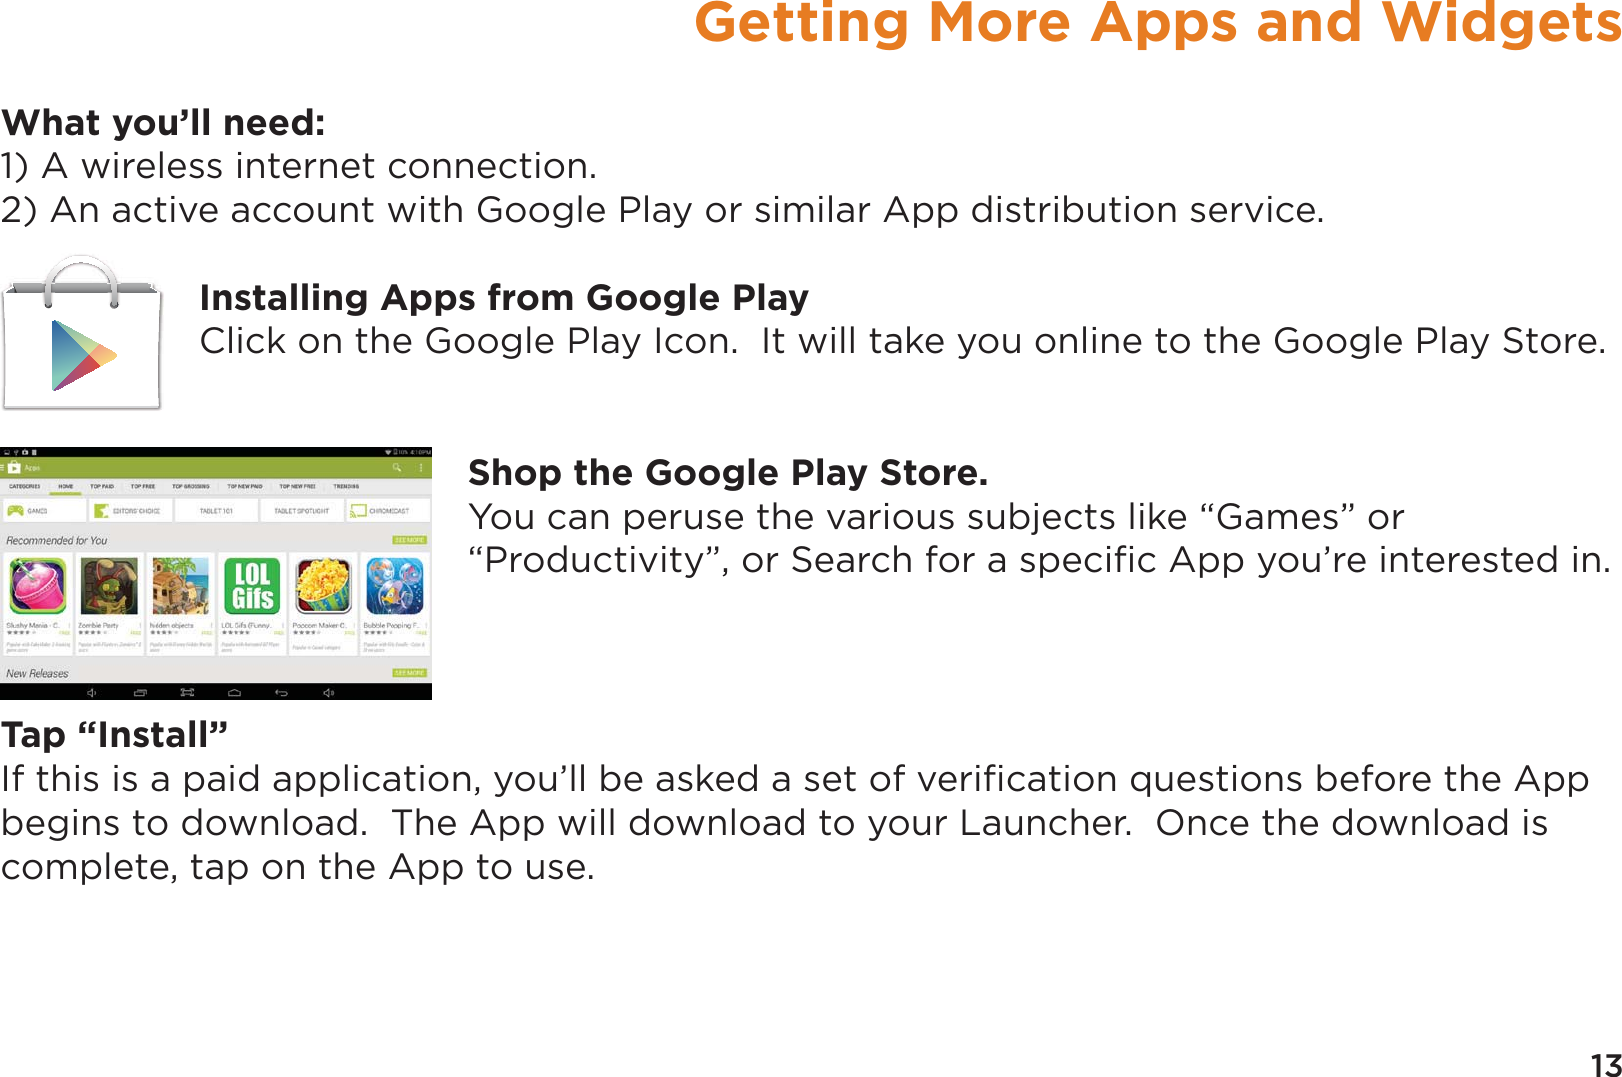 13Getting More Apps and WidgetsWhat you’ll need:1) A wireless internet connection.2) An active account with Google Play or similar App distribution service.Installing Apps from Google PlayClick on the Google Play Icon.  It will take you online to the Google Play Store.Shop the Google Play Store.You can peruse the various subjects like “Games” or “Productivity”, or Search for a speciﬁc App you’re interested in.Tap “Install”If this is a paid application, you’ll be asked a set of veriﬁcation questions before the App begins to download.  The App will download to your Launcher.  Once the download is complete, tap on the App to use.